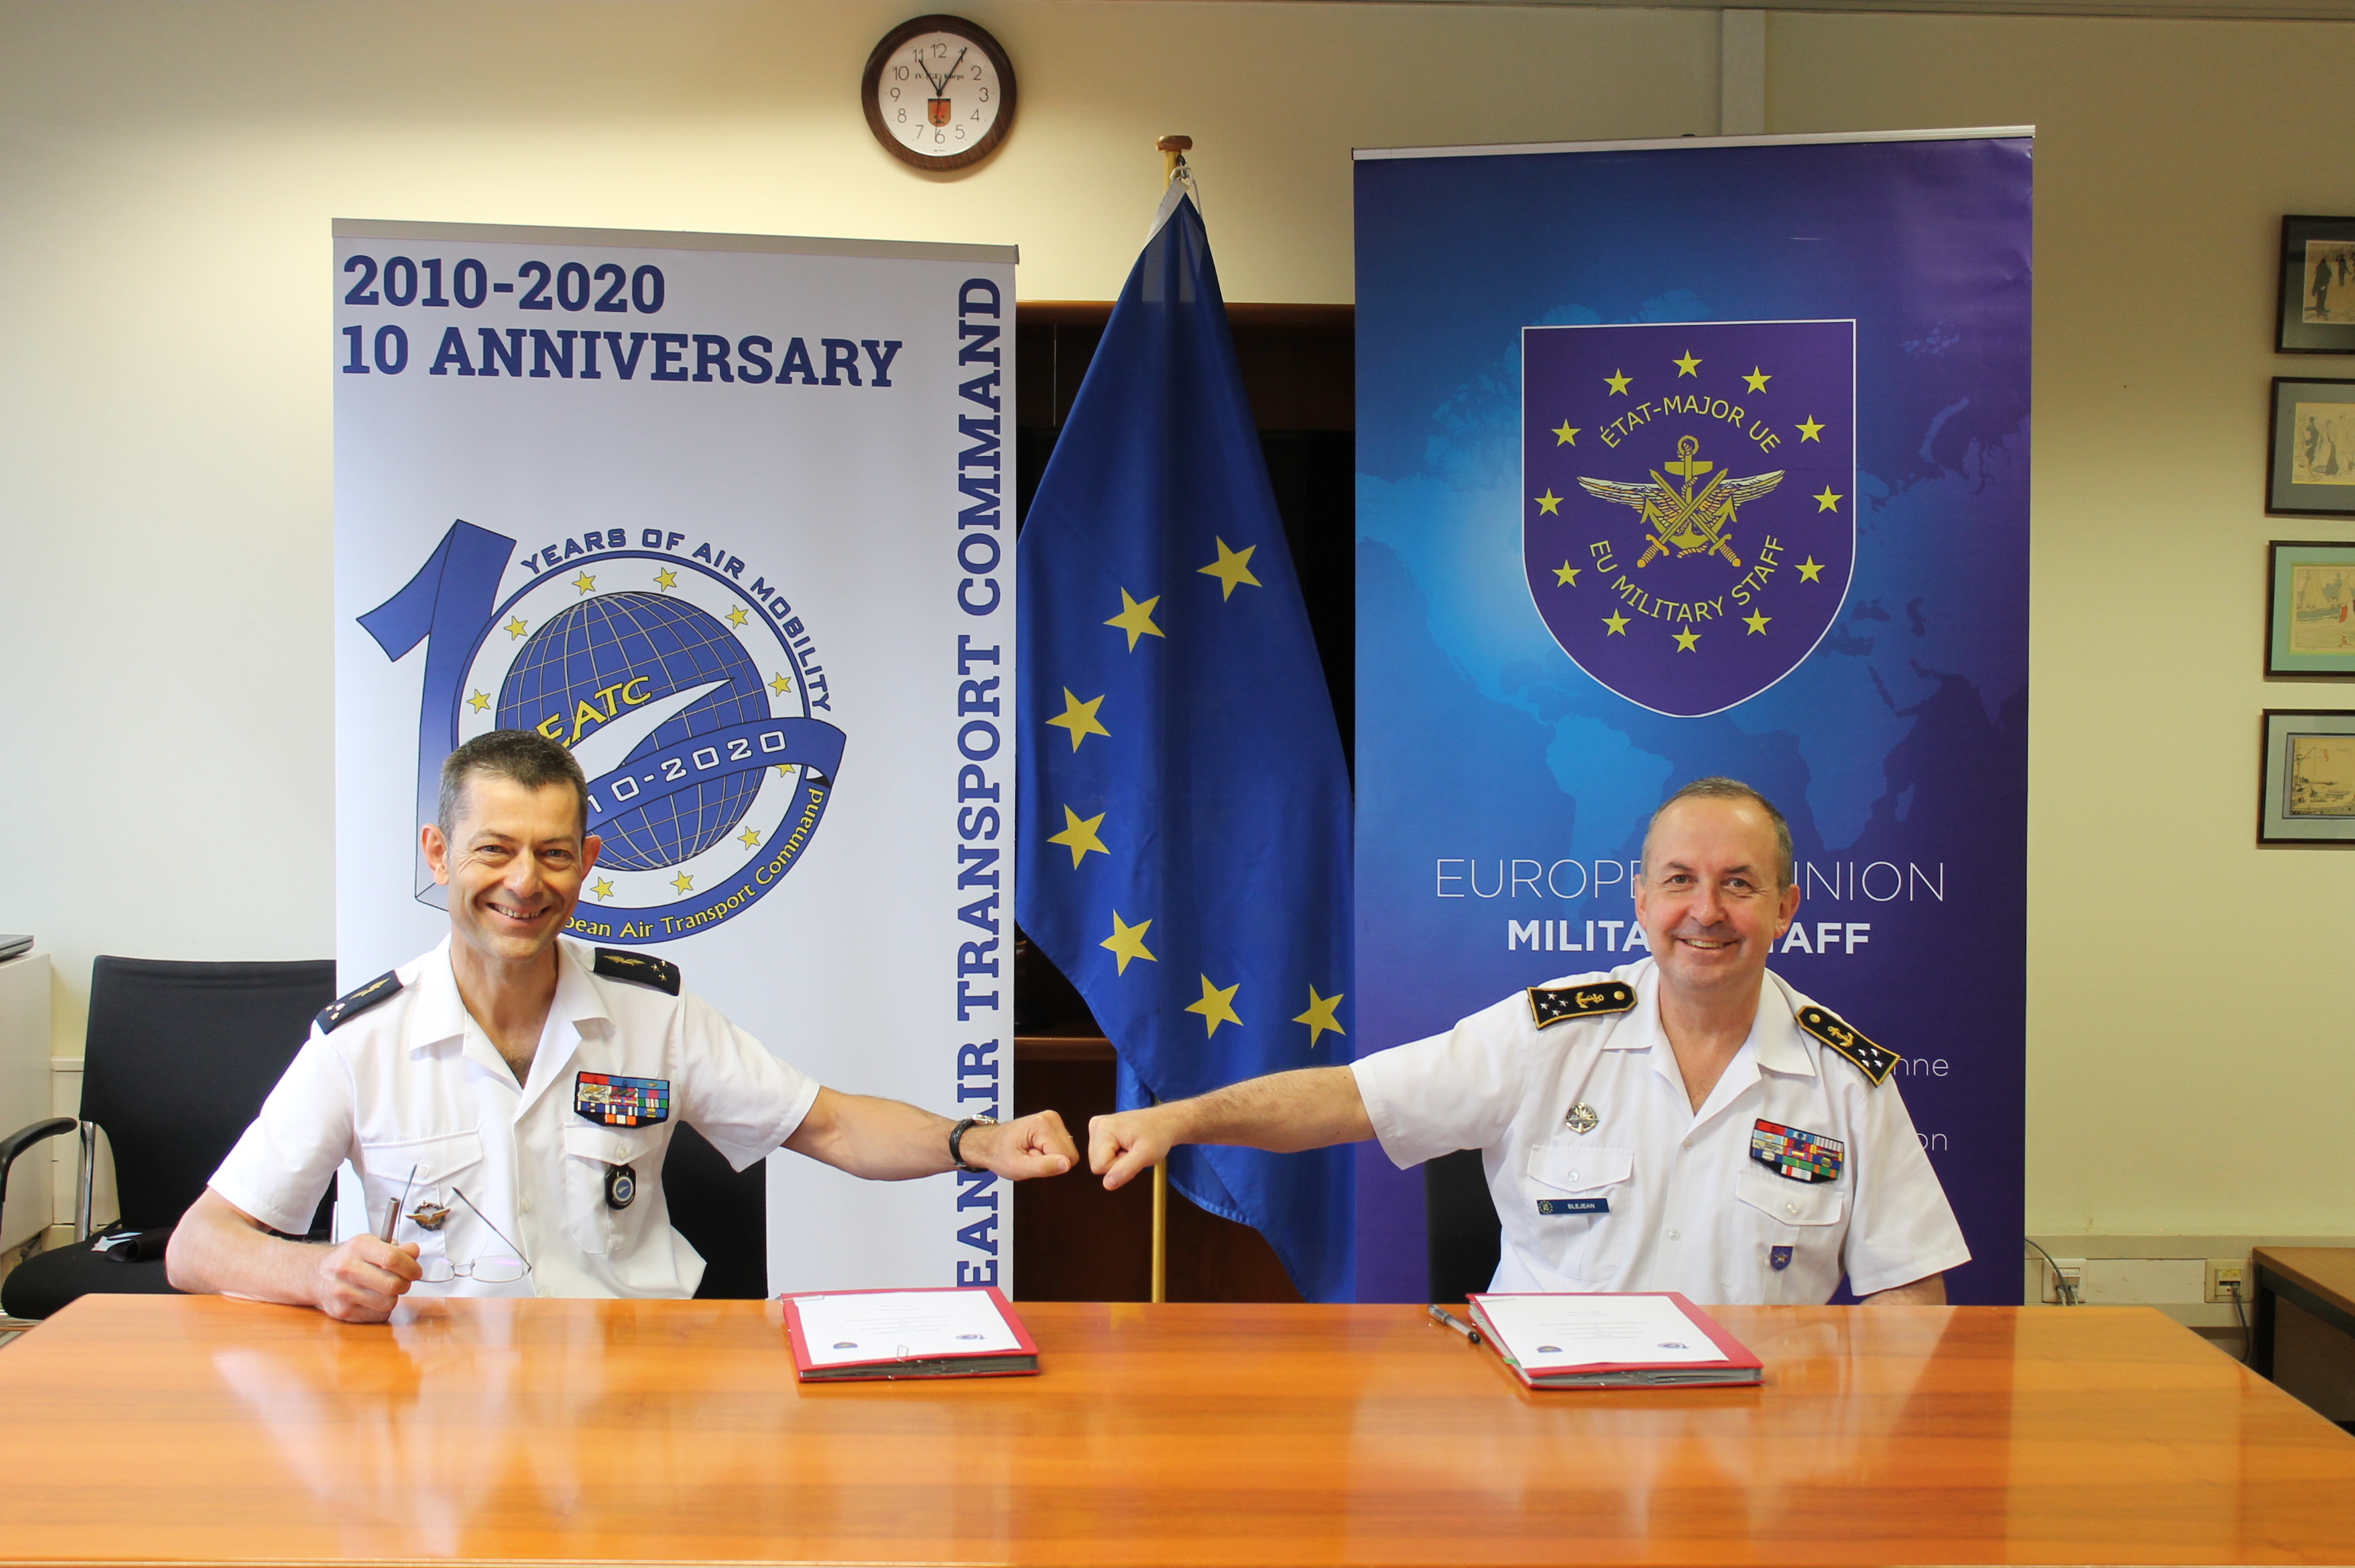 EATC and EUMS strengthen cooperation on the field of aeromedical evacuation